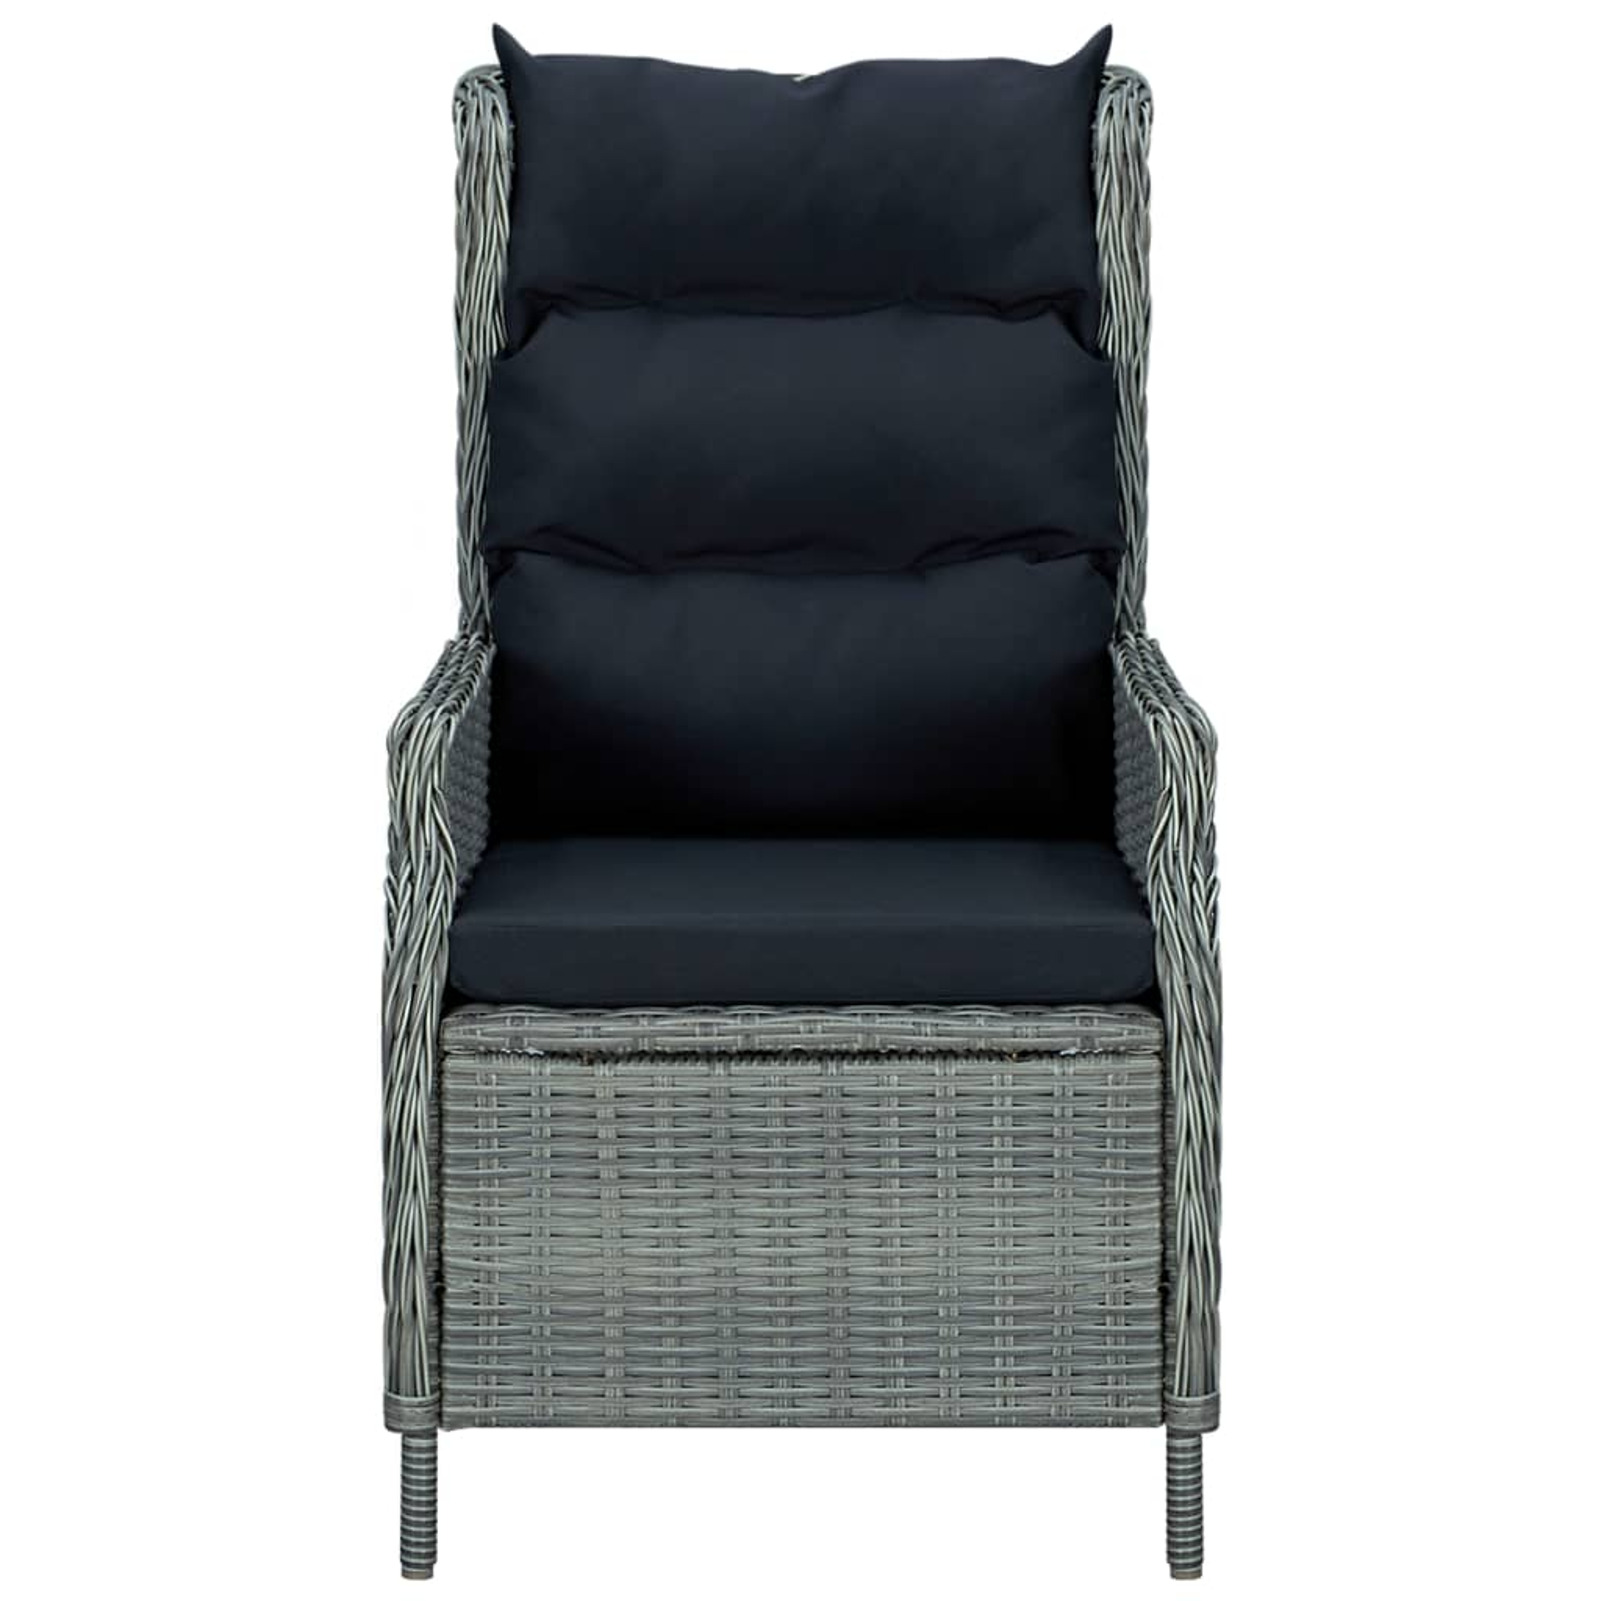 Suzicca Reclining Patio Chair with Cushions Poly Rattan Gray - image 2 of 7